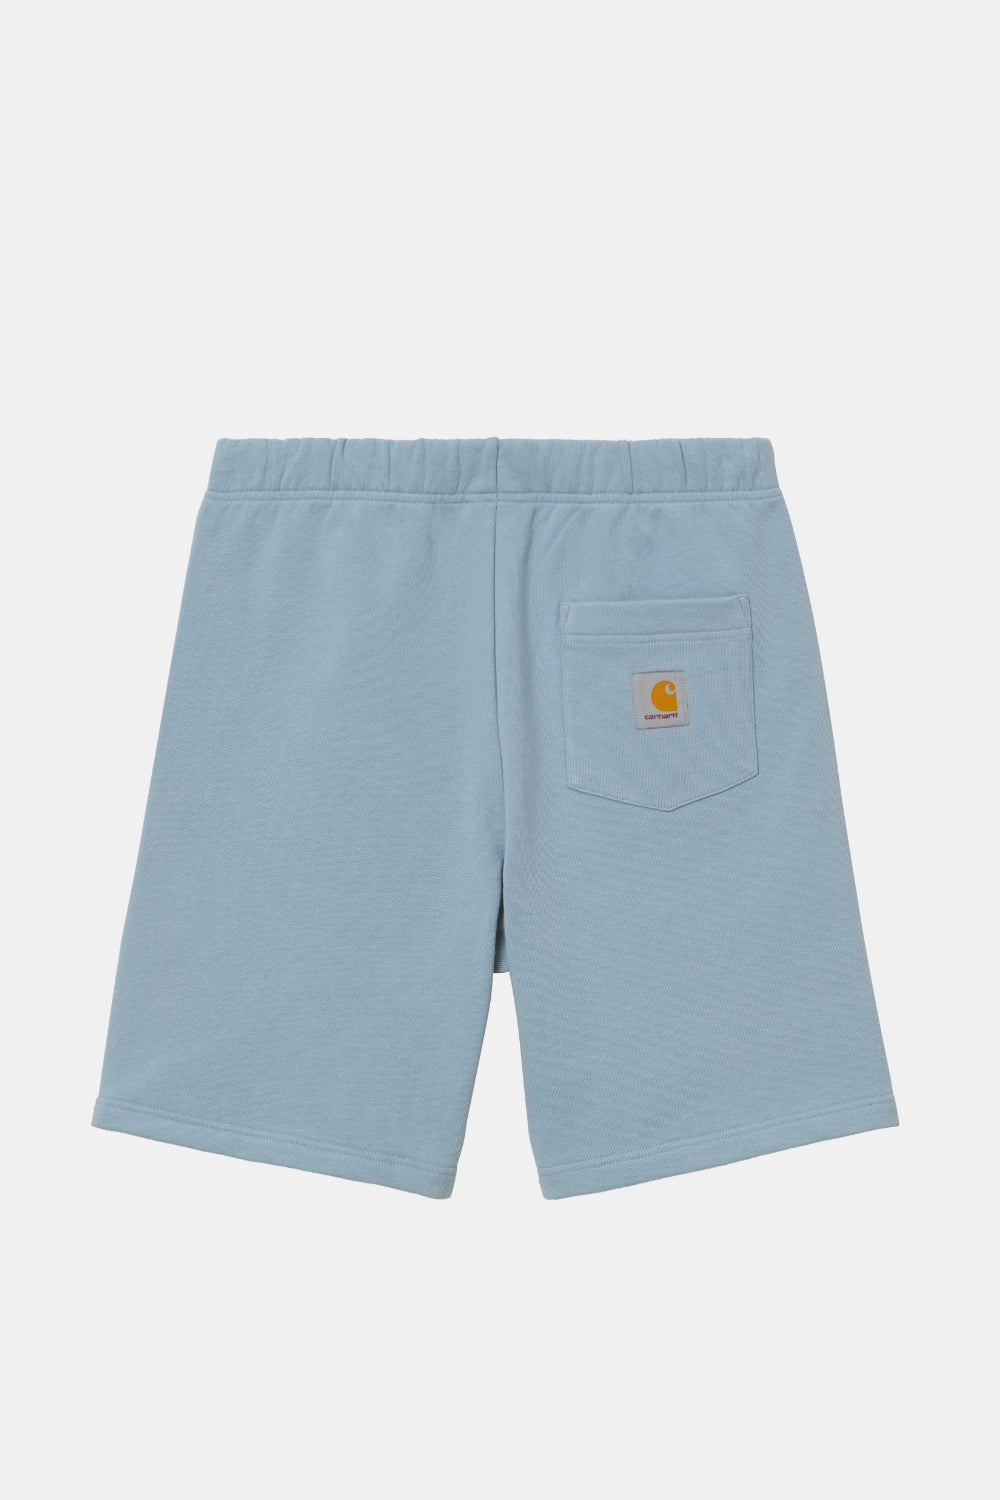 Carhartt WIP Pocket Sweat Shorts (Frosted Blue) | Number Six